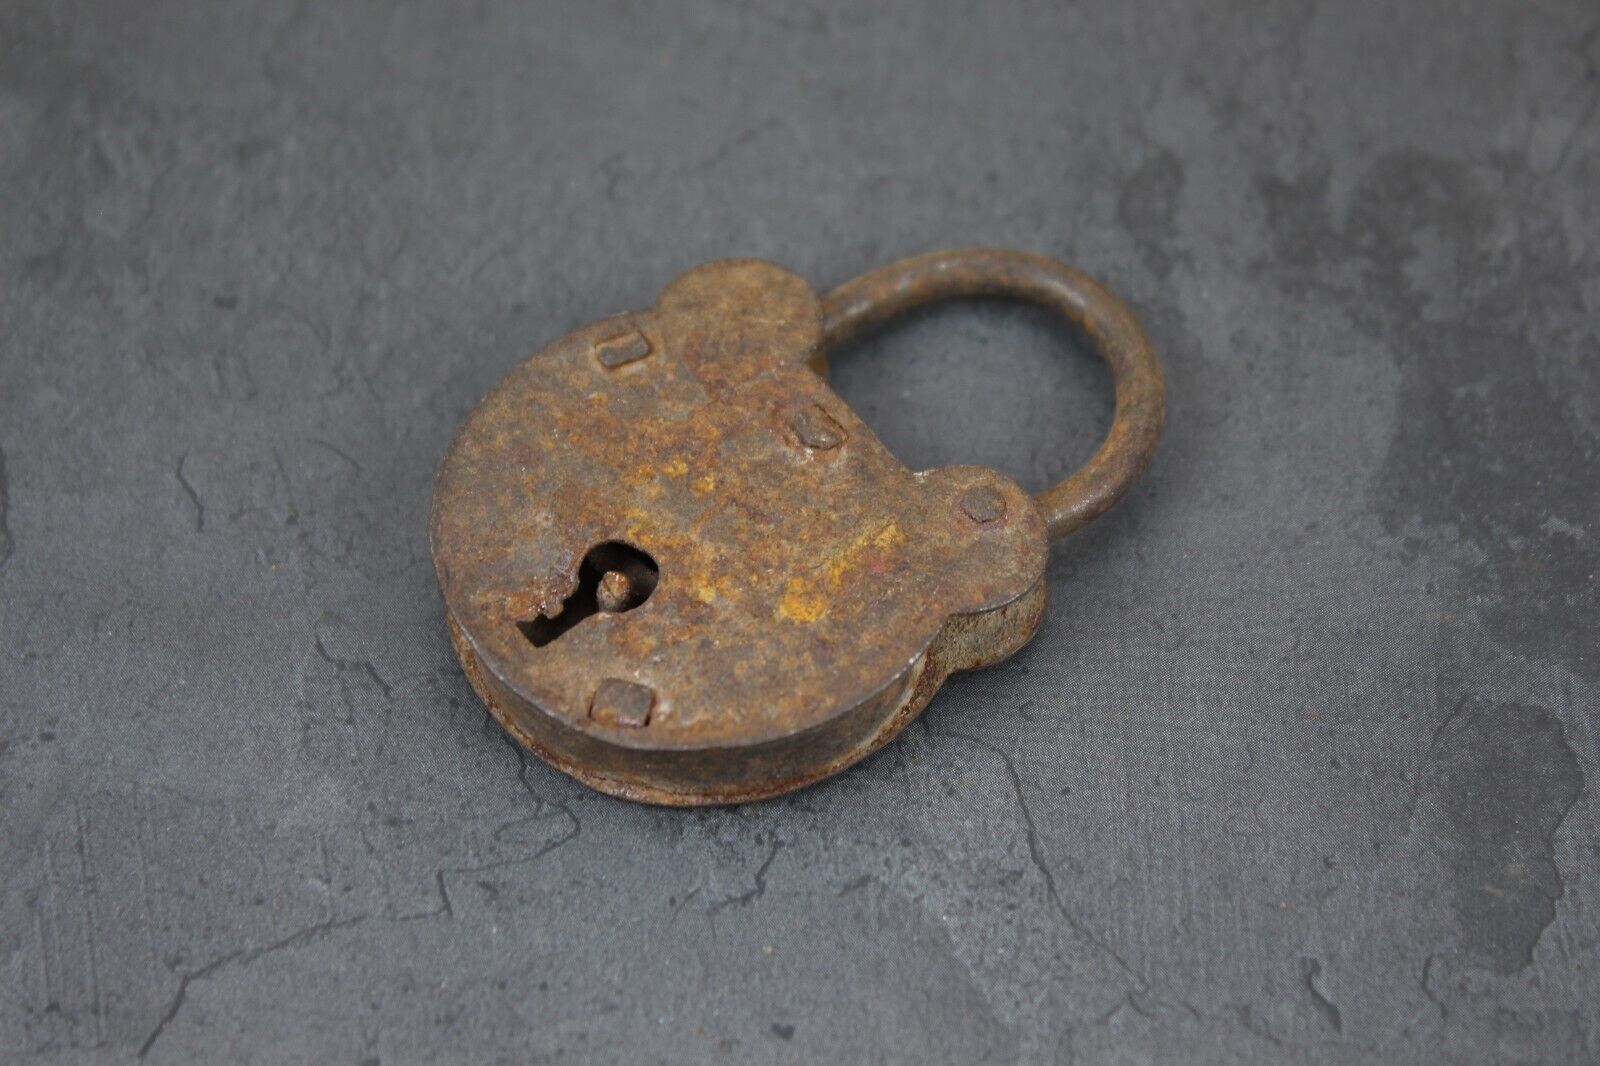 Small Collectible Iron Padlock, Antique Tiny Old Vintage Charm for Key Chain Use